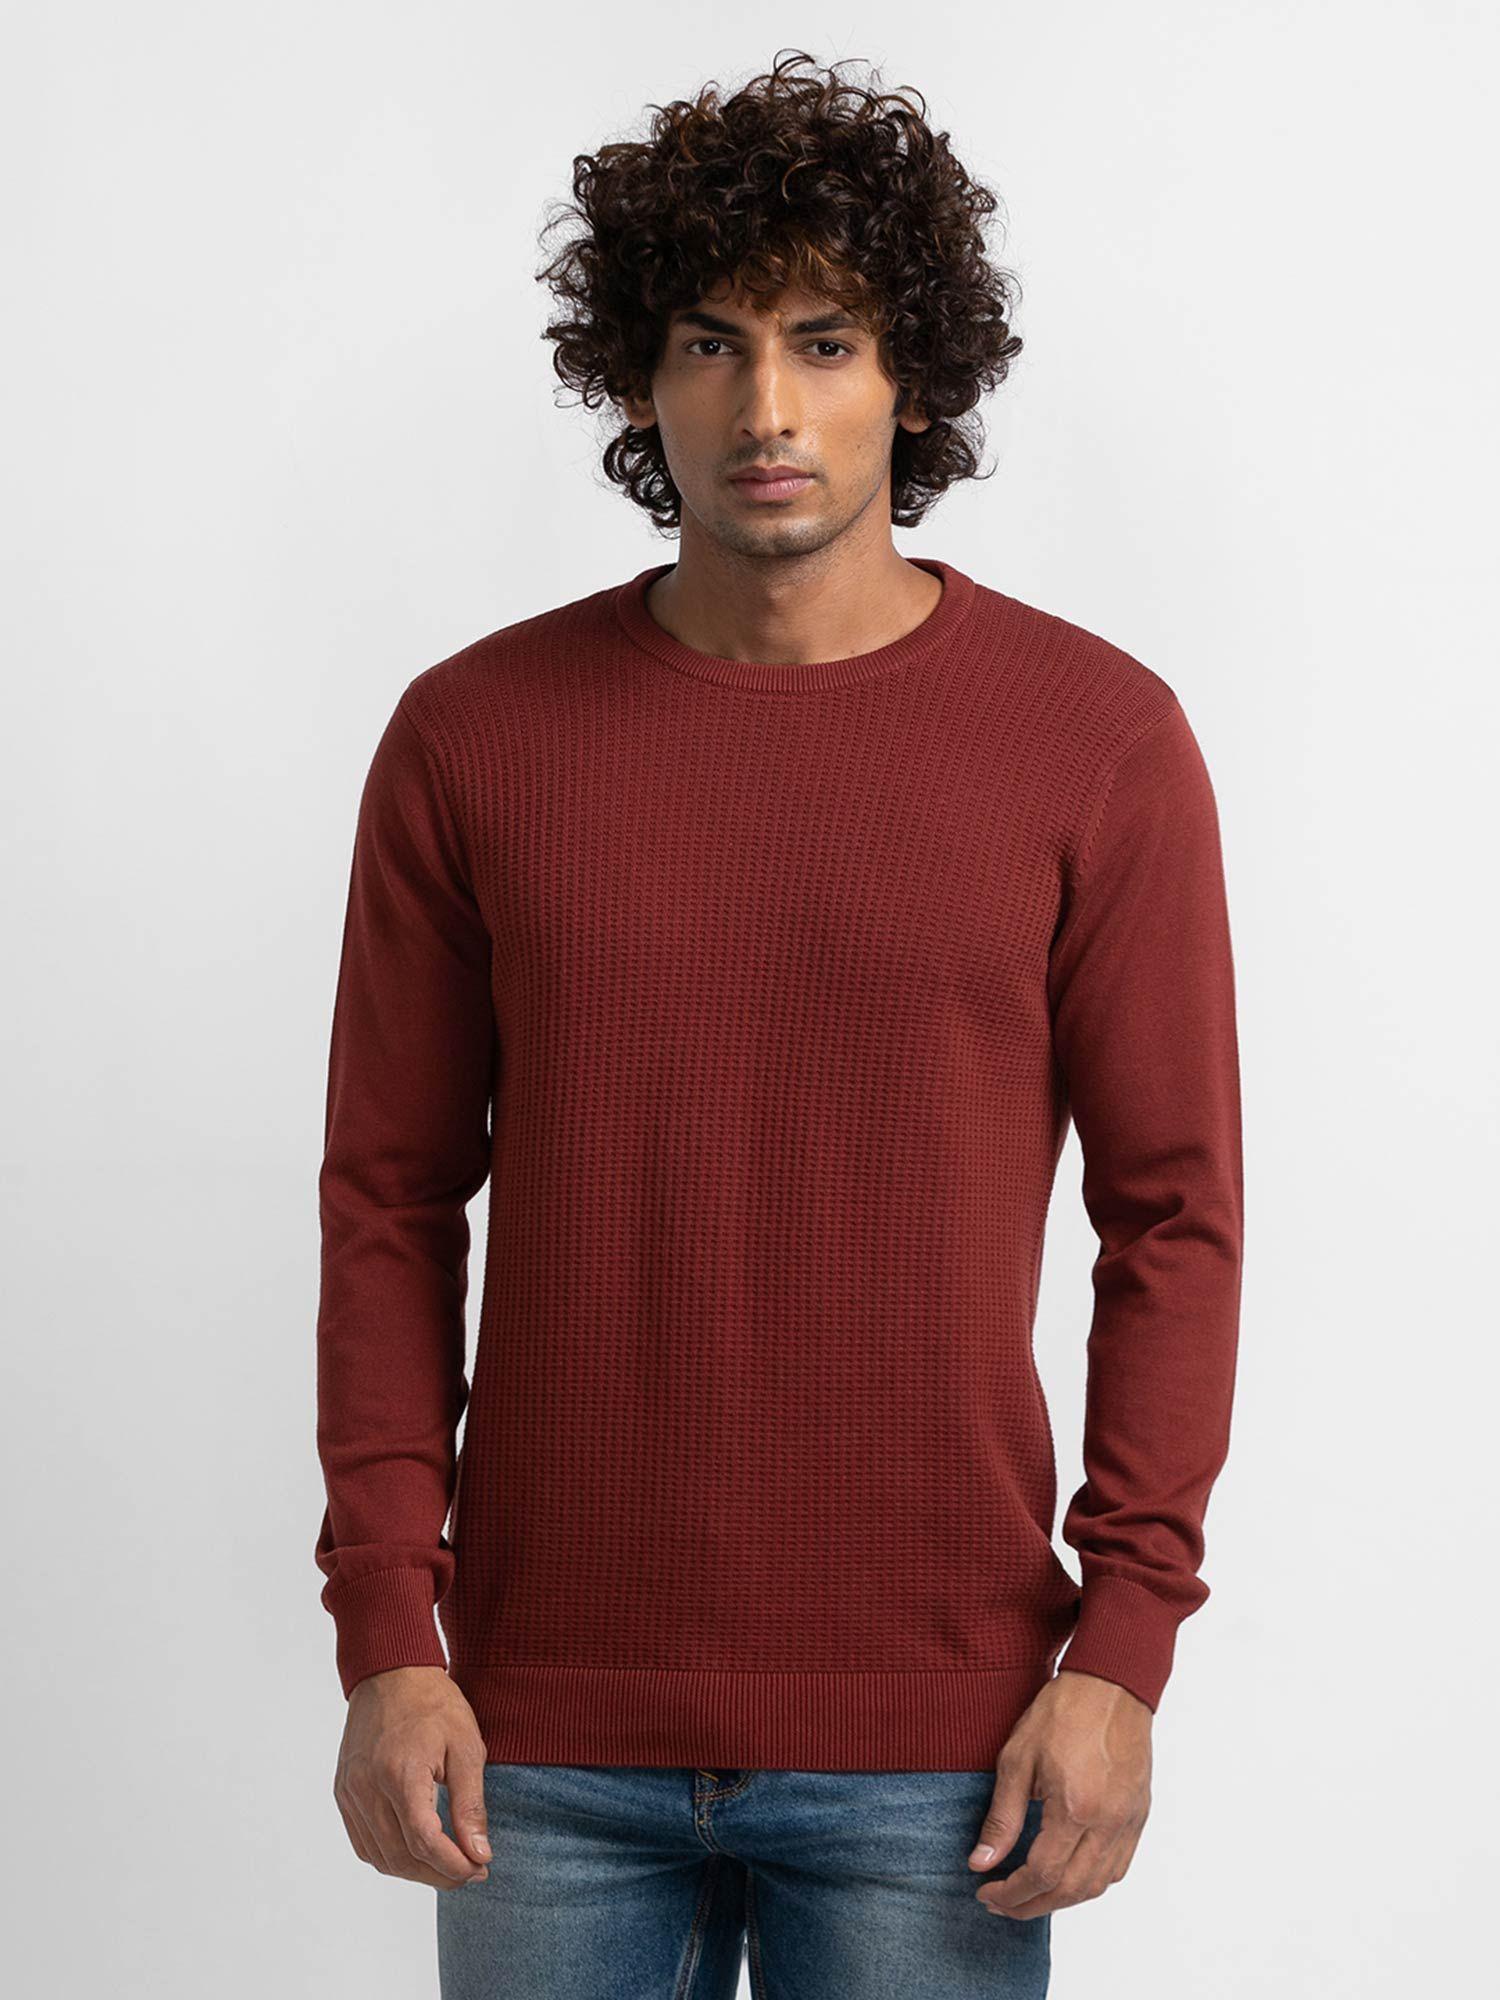 Brick Red Cotton Full Sleeve Casual Sweater for Men